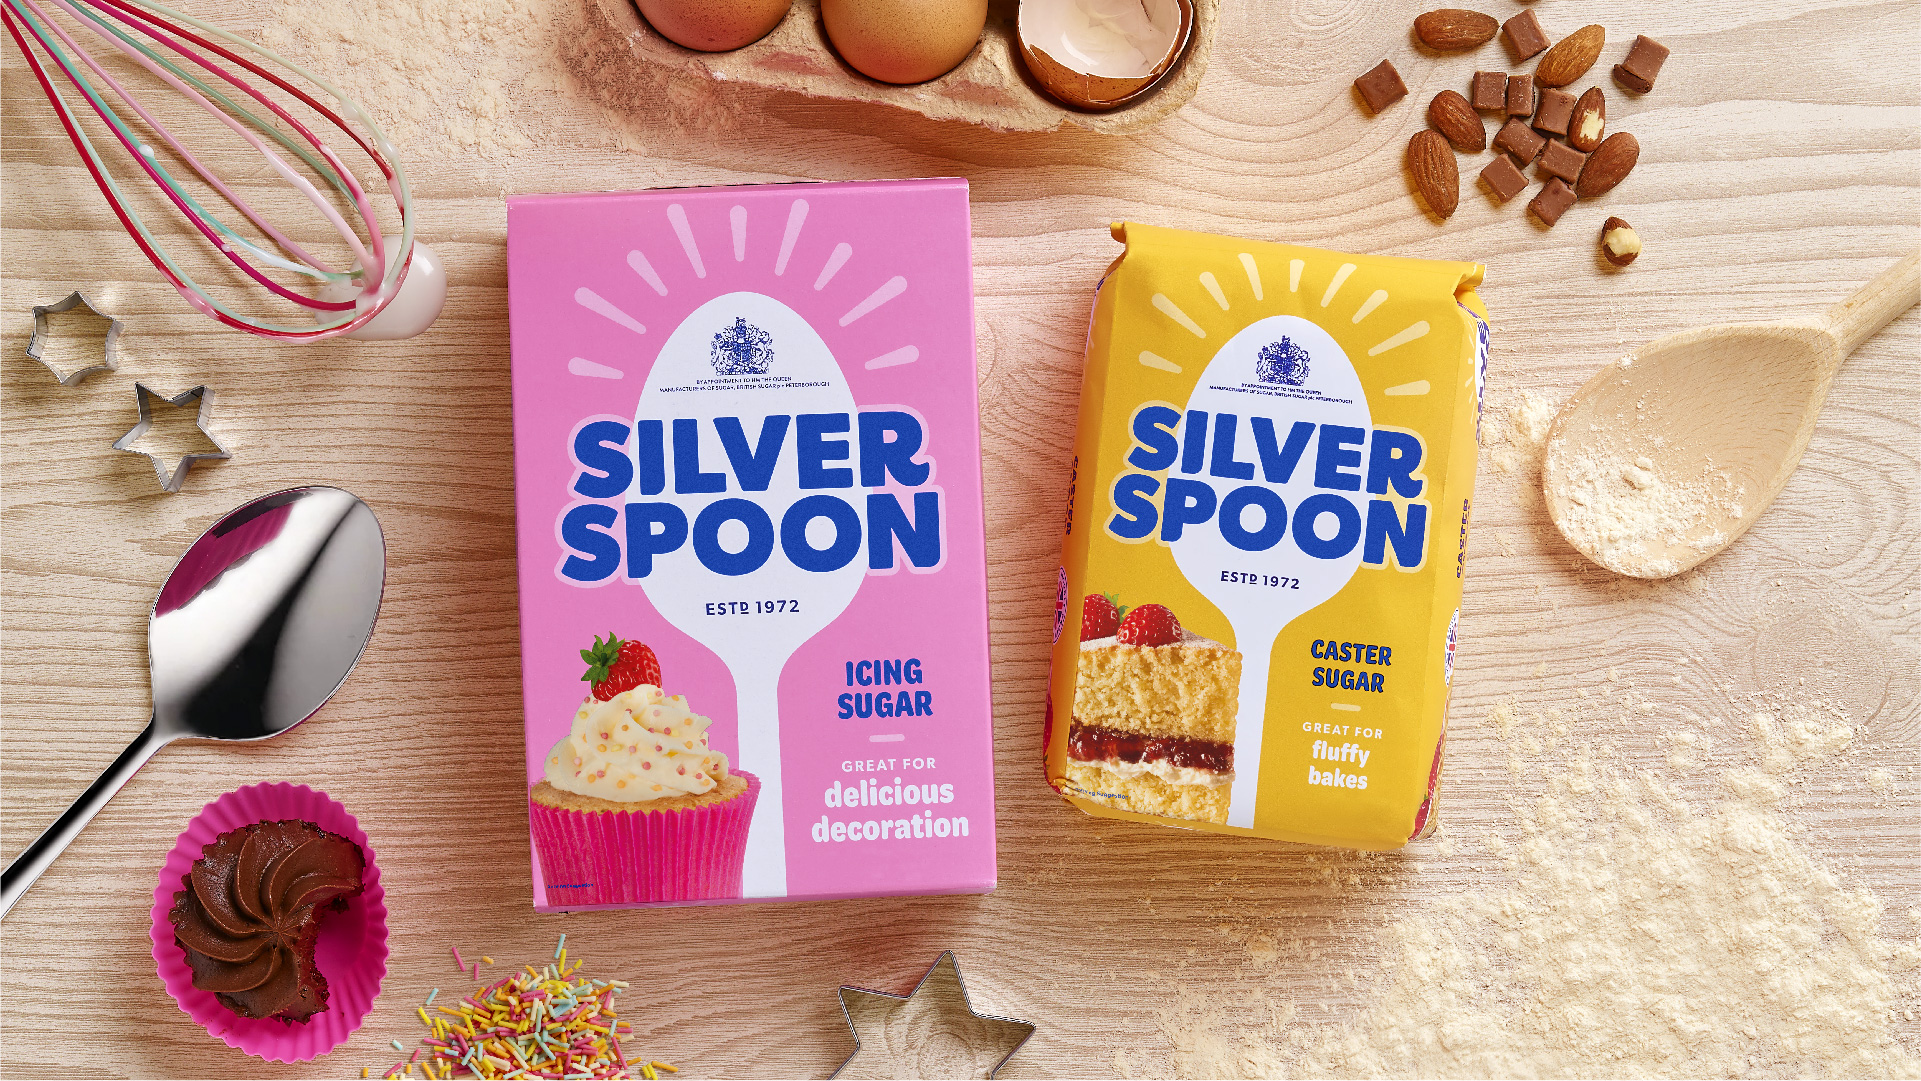 UK Sugar Mainstay Silver Spoon Gets a Fun New Look for the 21st Century